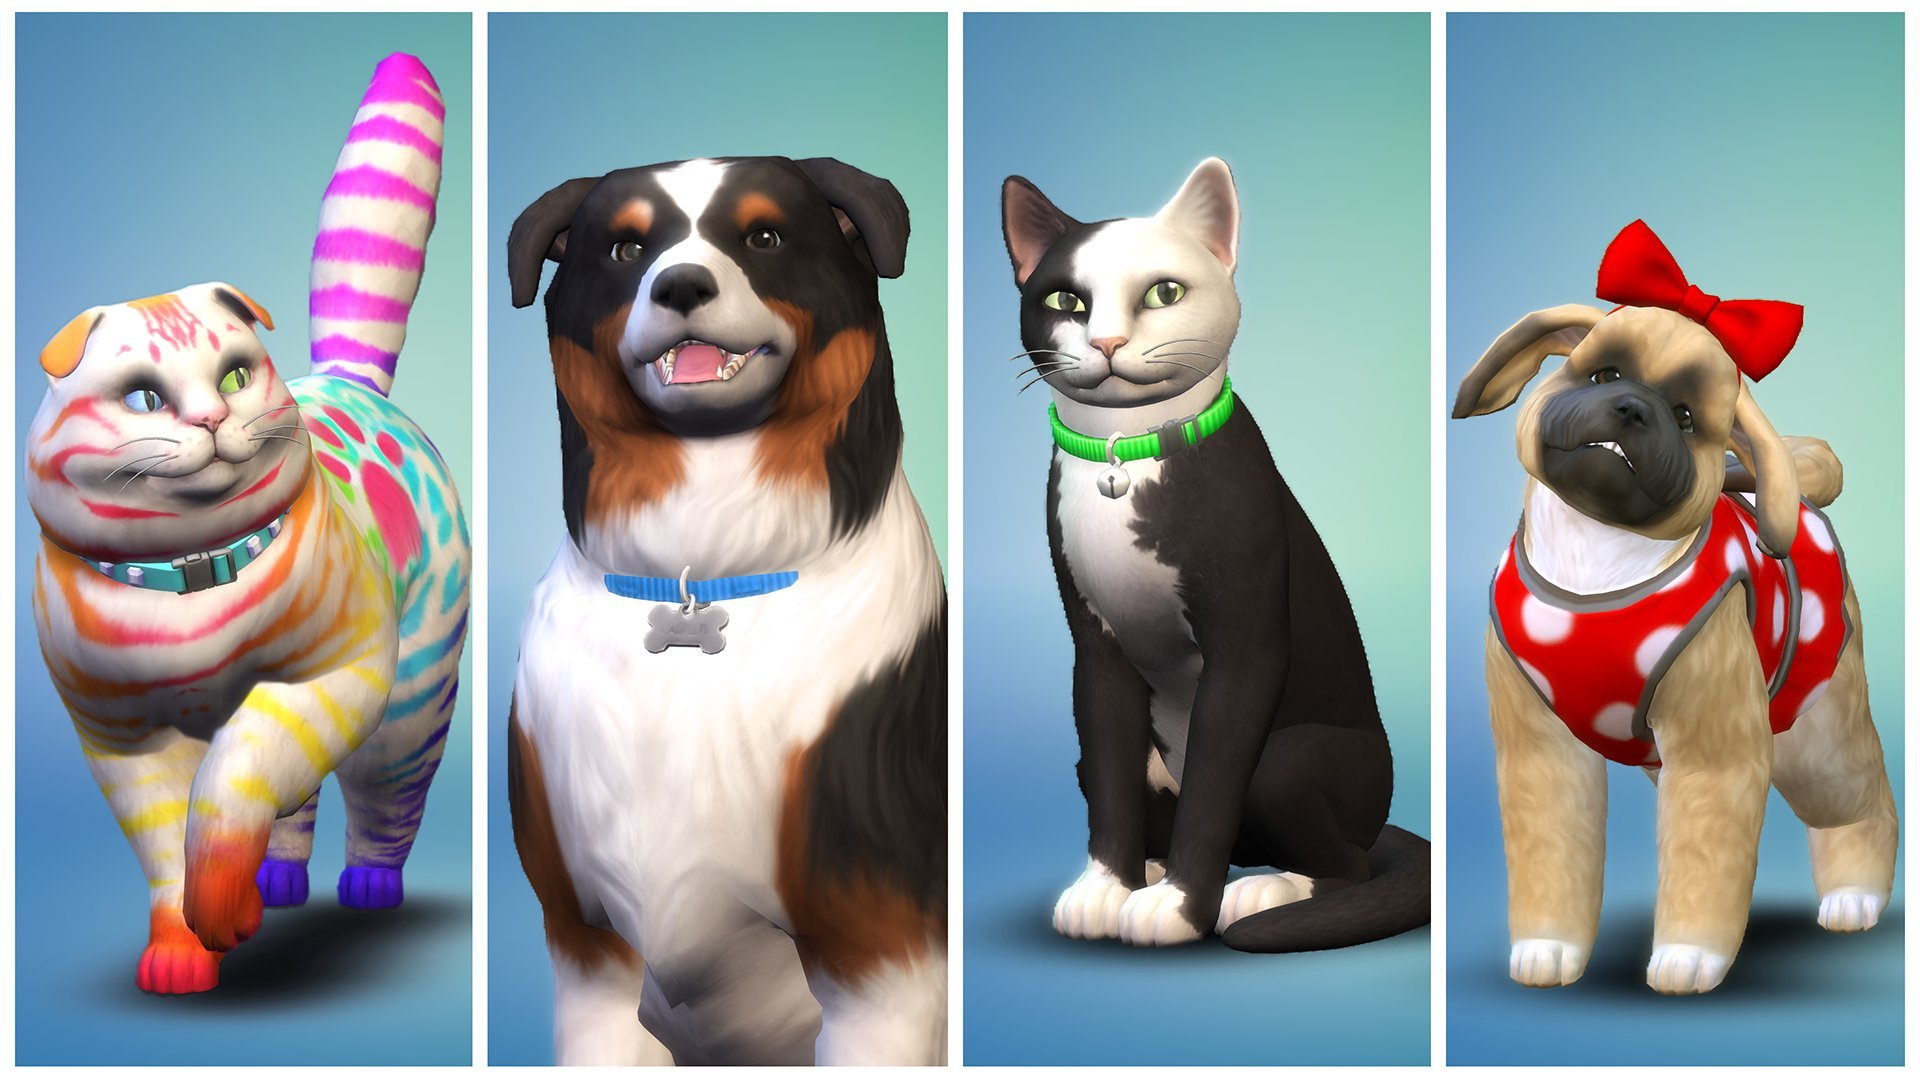 The Sims 4 Plus Cats & Dogs Bundle - PlayStation 4